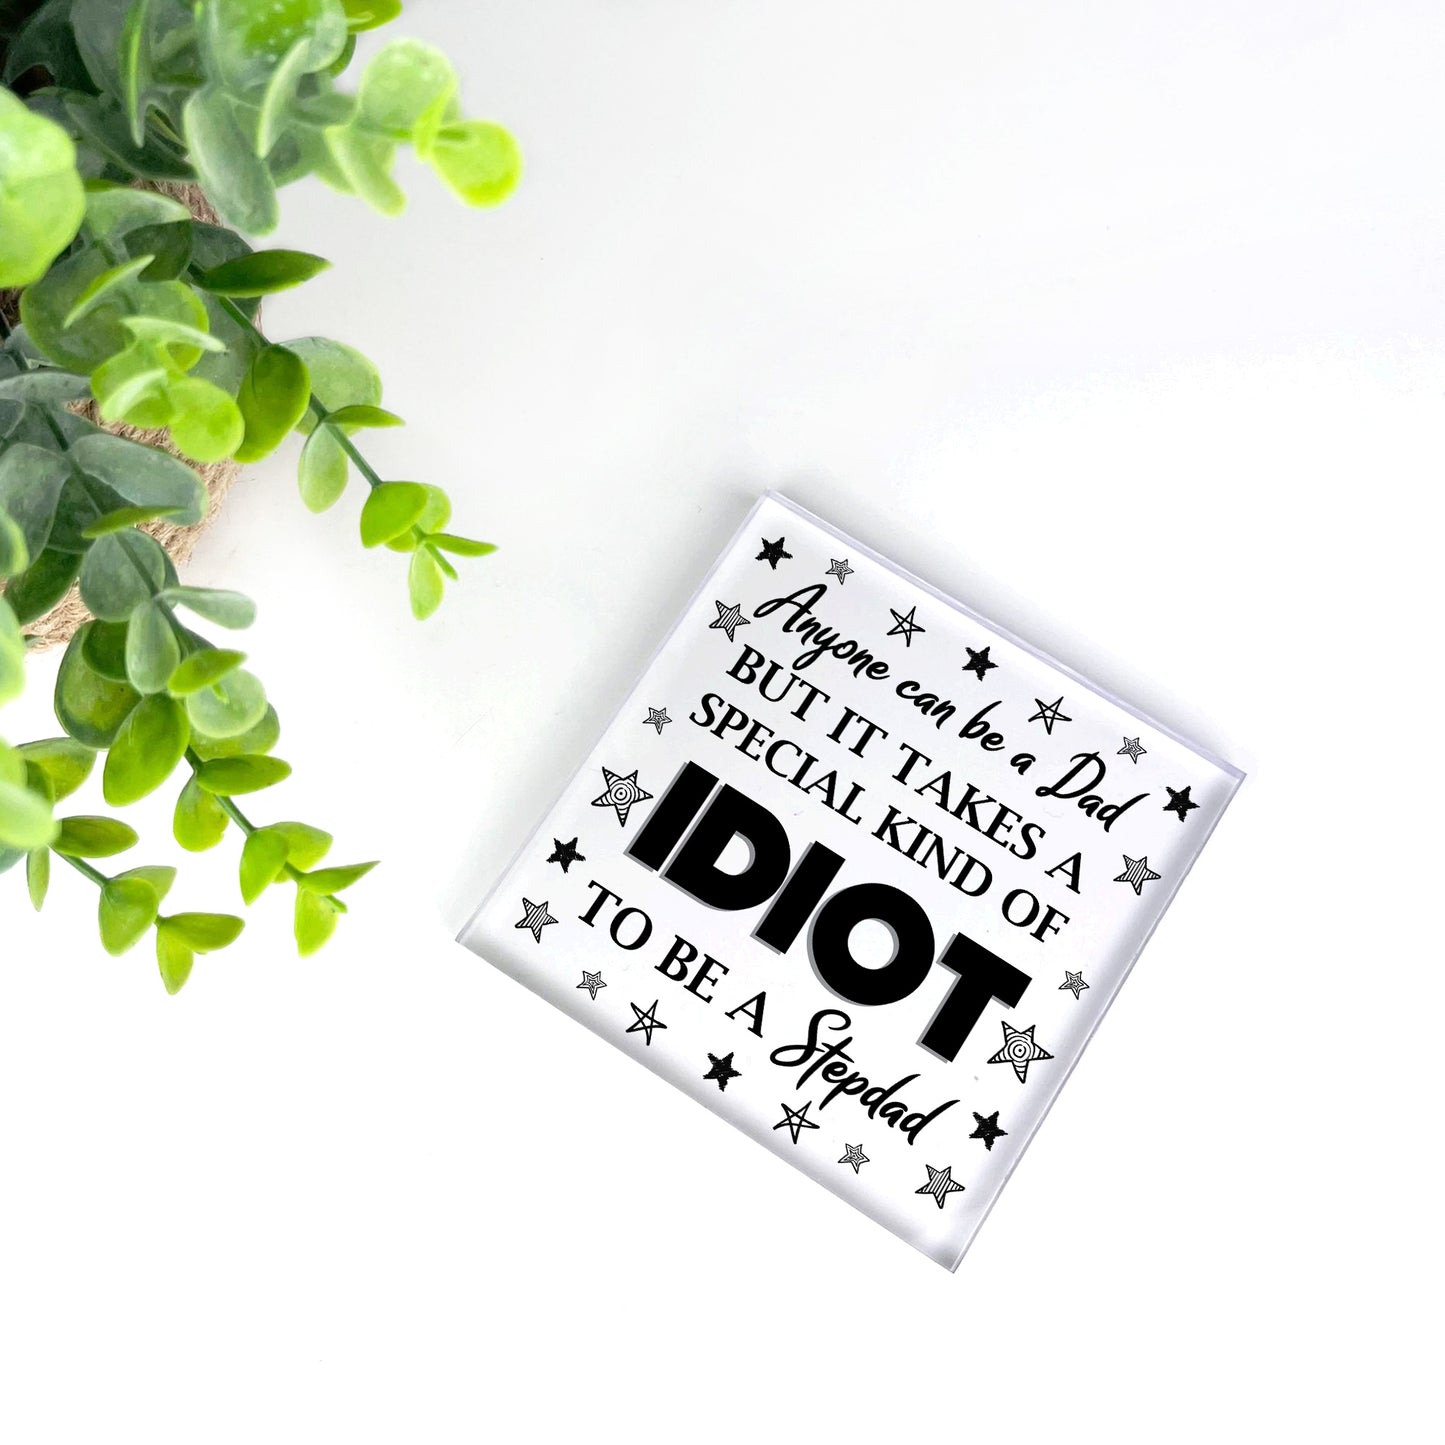 Funny Joke Step Dad Fathers Day Gifts Stepdad Birthday Gift